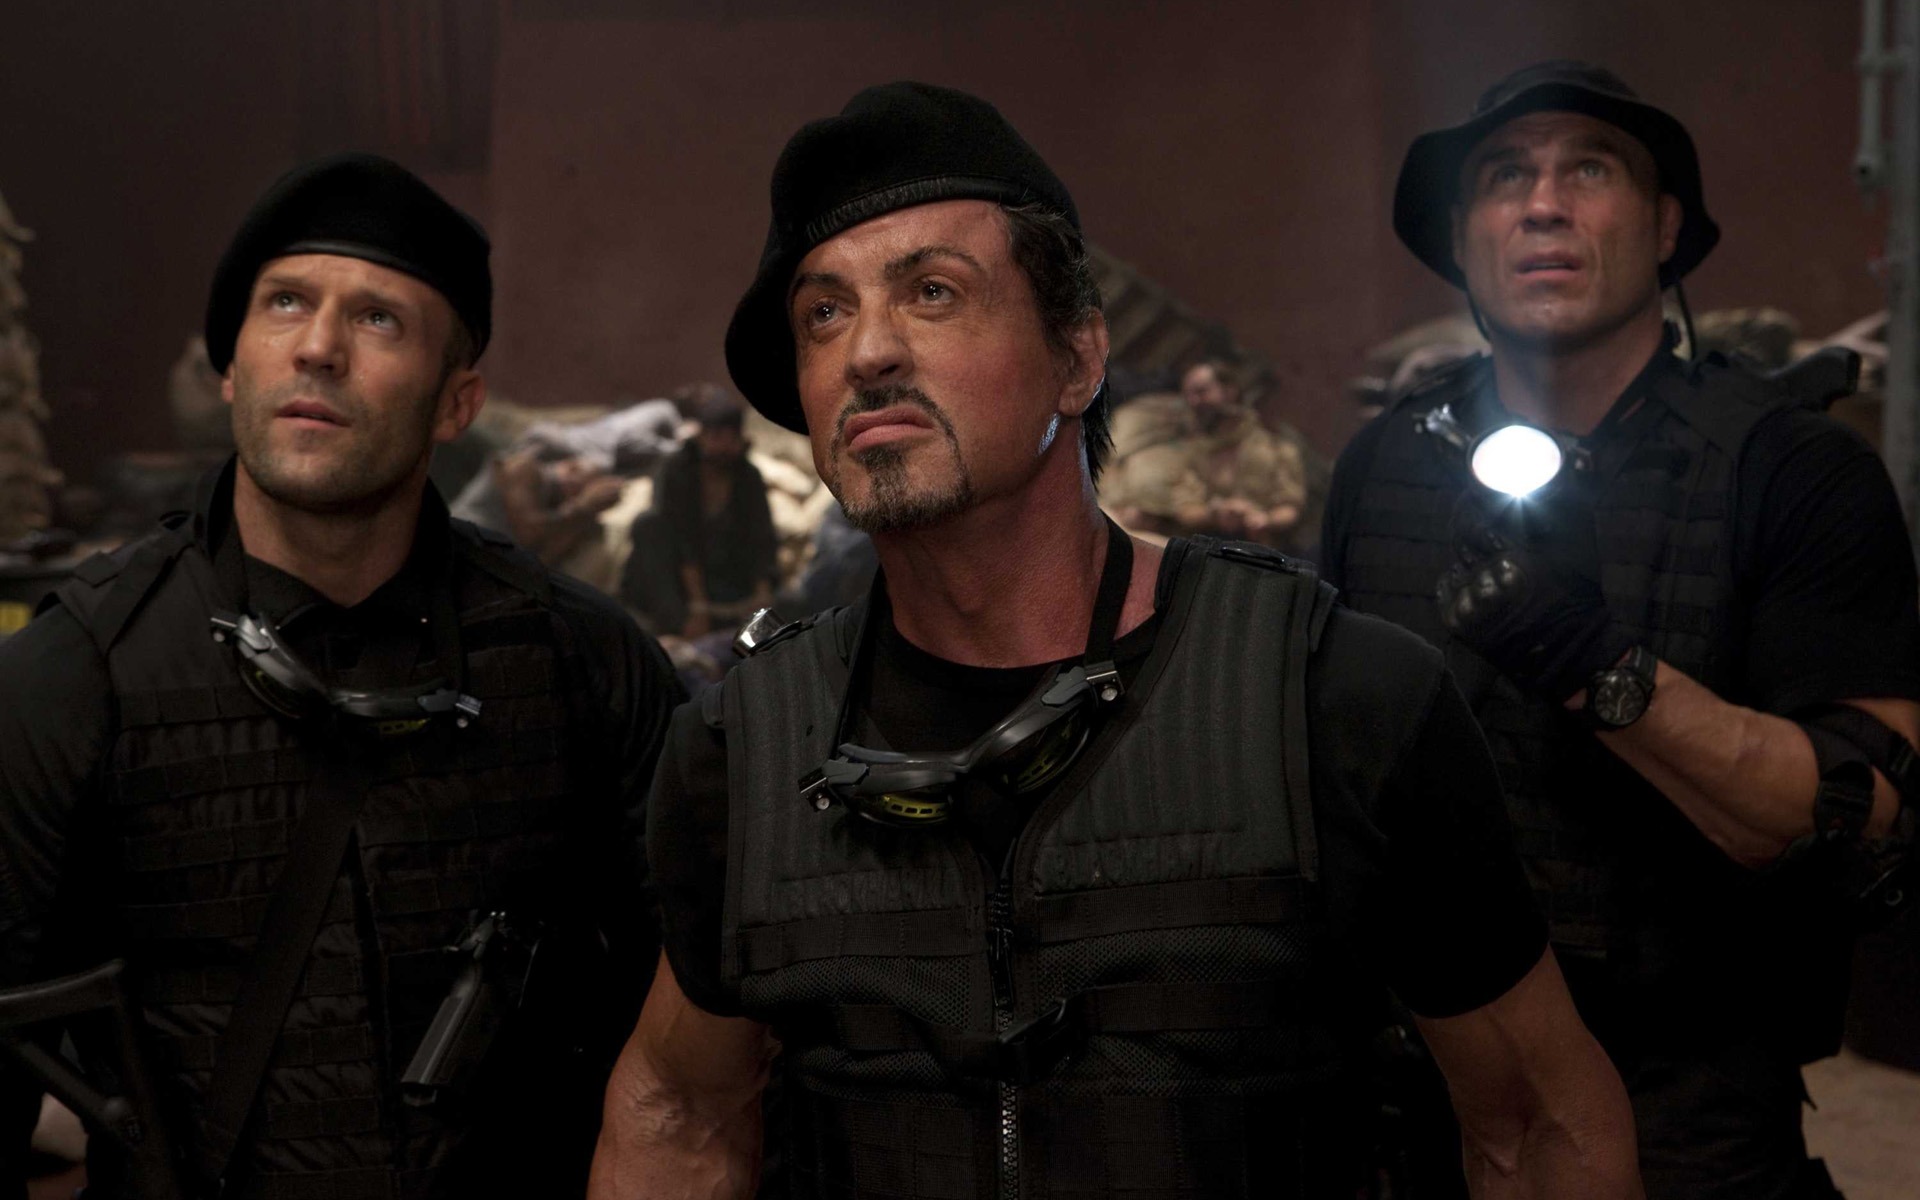 The Expendables HD Wallpaper #5 - 1920x1200